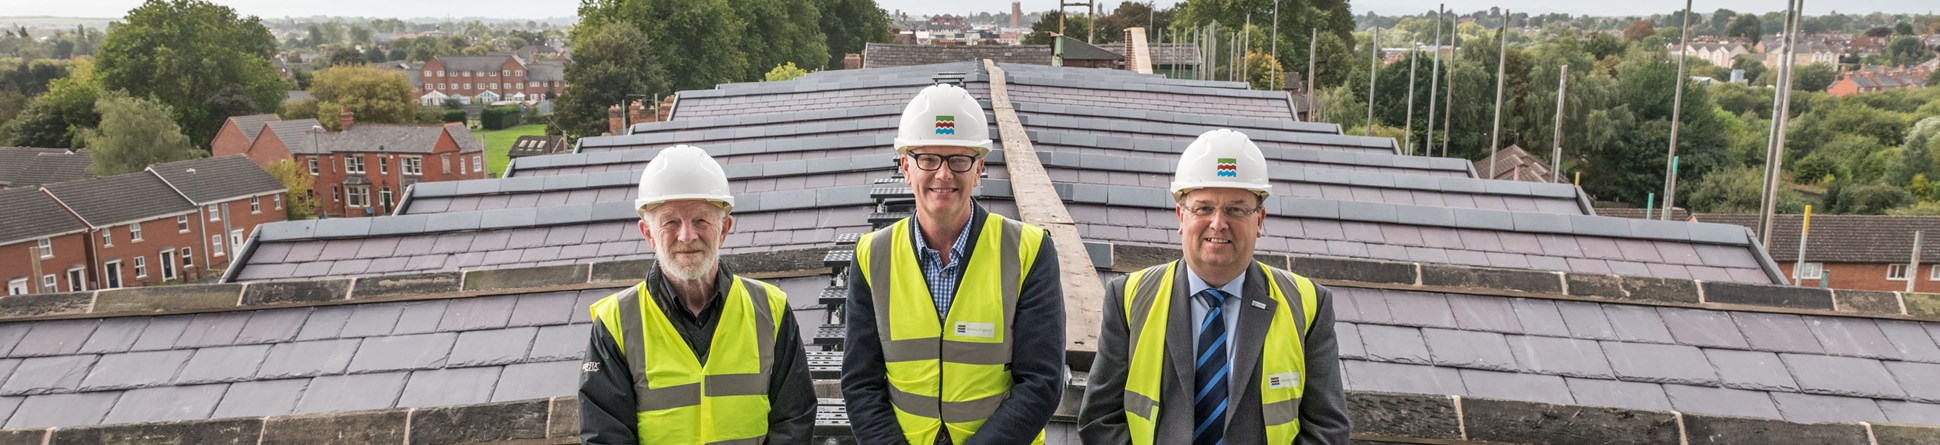 Shrewsbury Flaxmill Maltings new roof on the Main Mill. From left to right, Alan Mosley (The Friends of Flaxmill Maltings Chairman), Alastair Godfrey (Shrewsbury Flaxmill Maltings Project Lead), Nic Laurens (Shropshire Council, Portfolio Holder for Economic Growth).